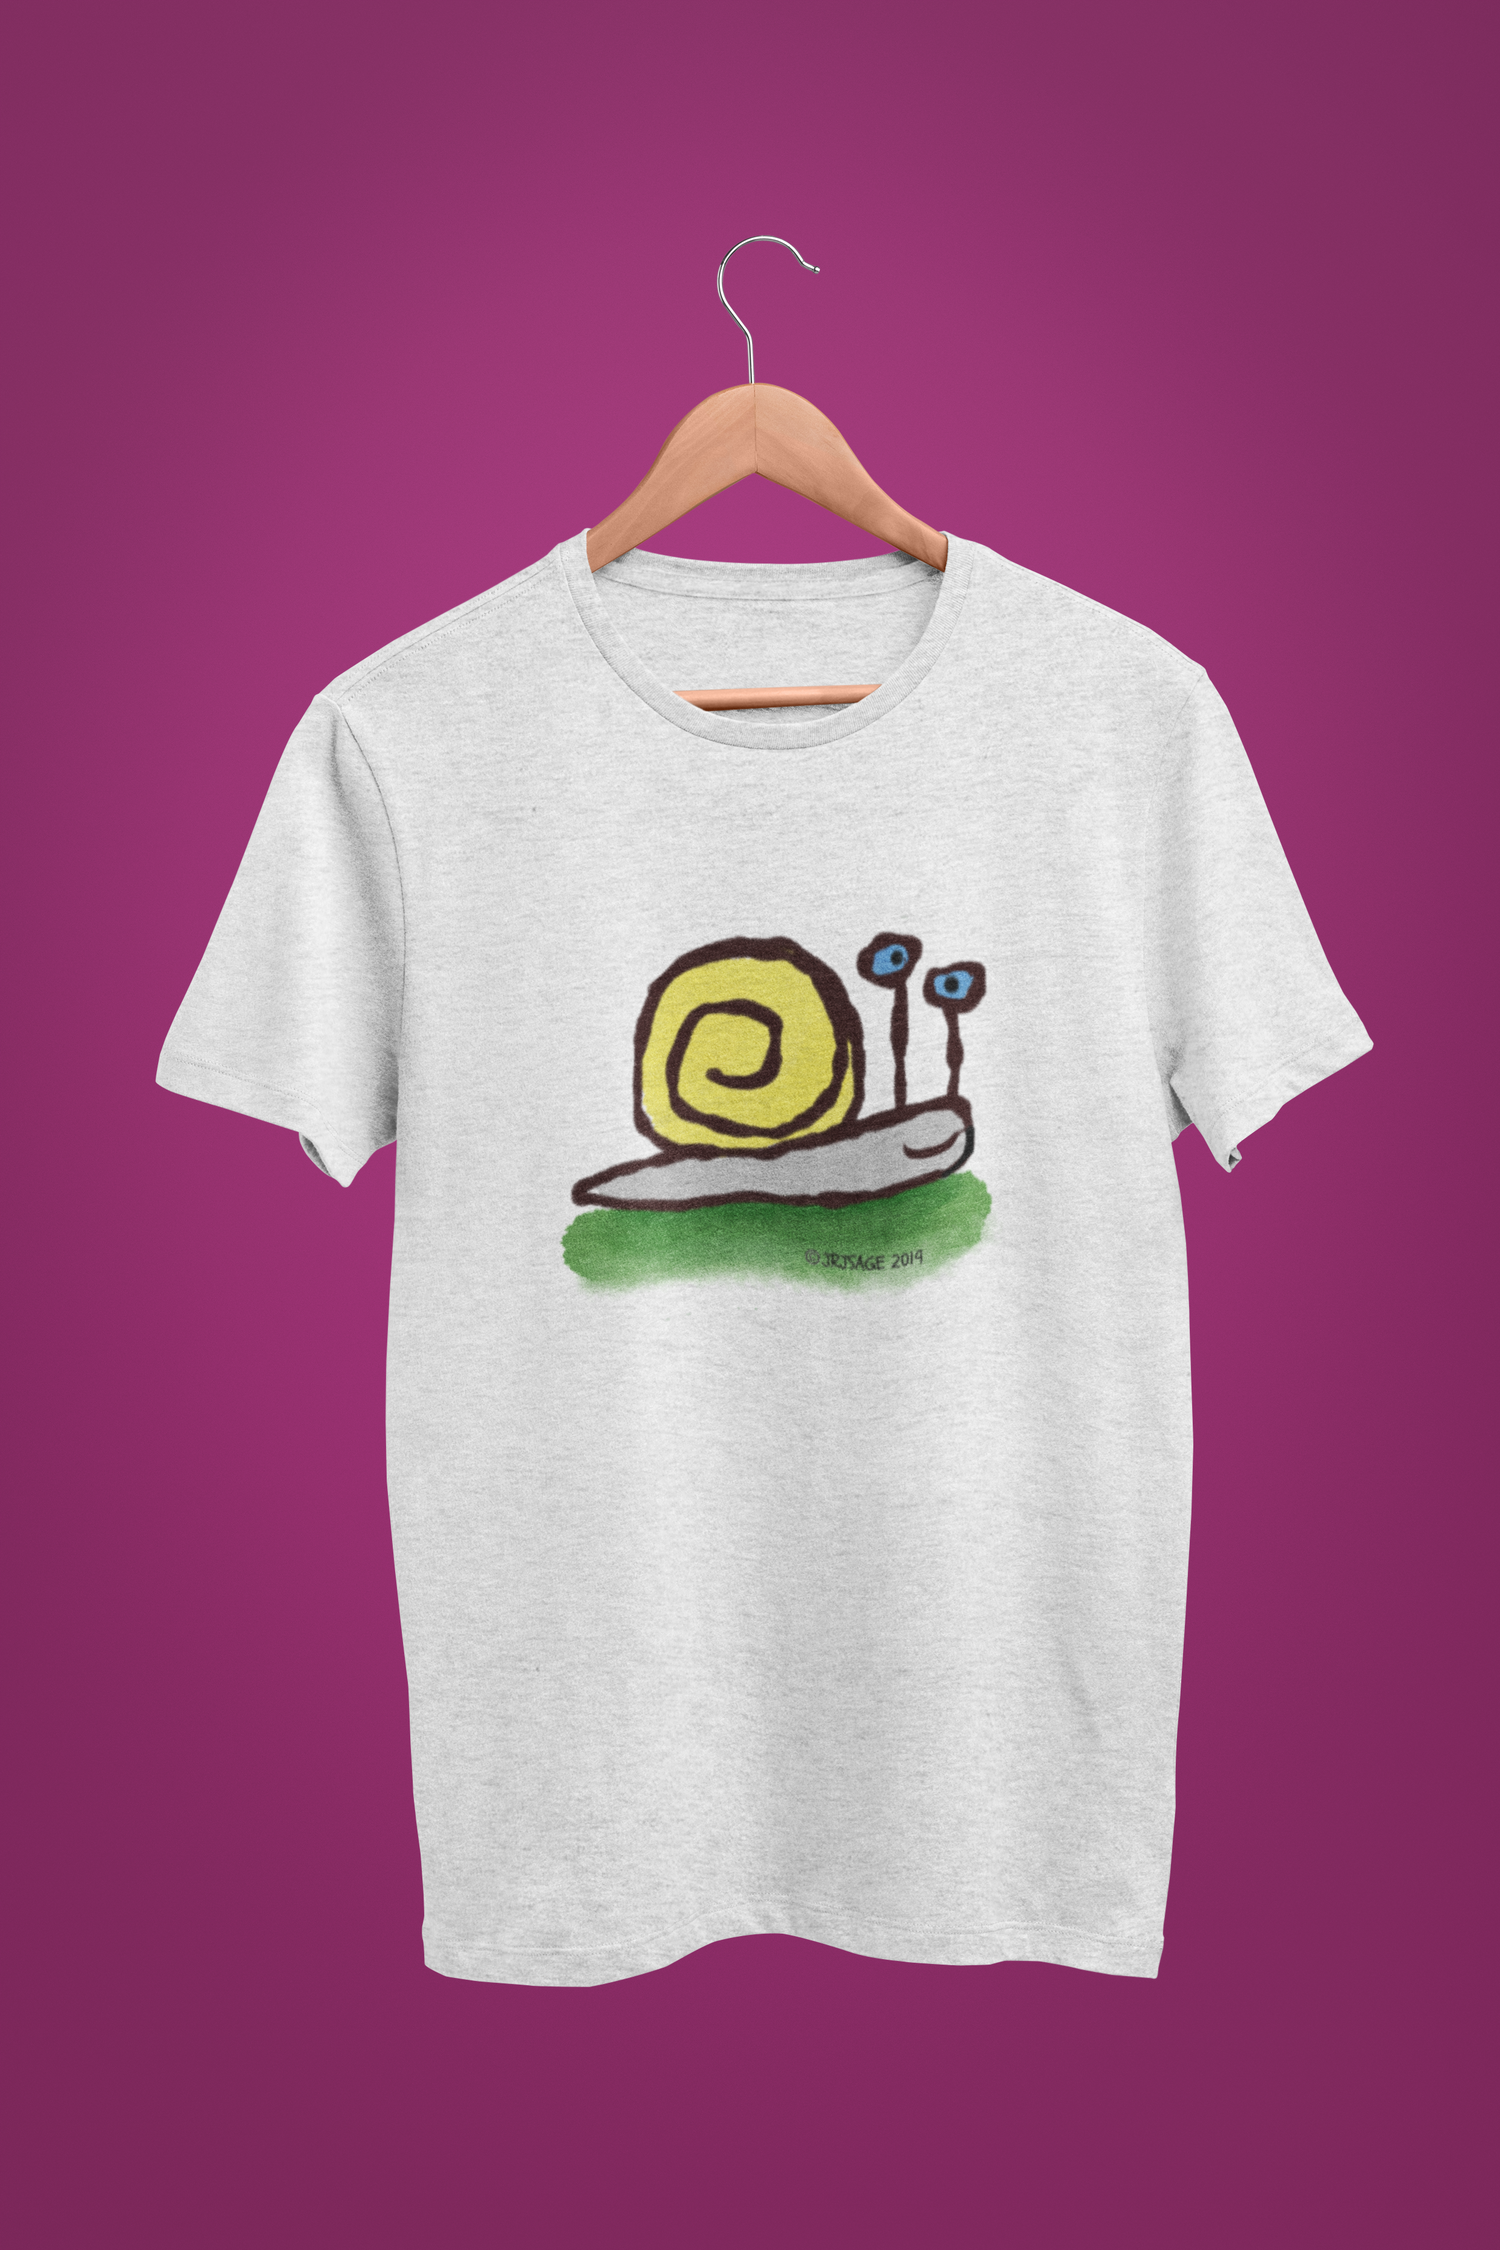 Snail T-shirt - A Cream Heather Grey Unisex Hector and Bone vegan cotton T-shirt with printed Cute Snail illustration